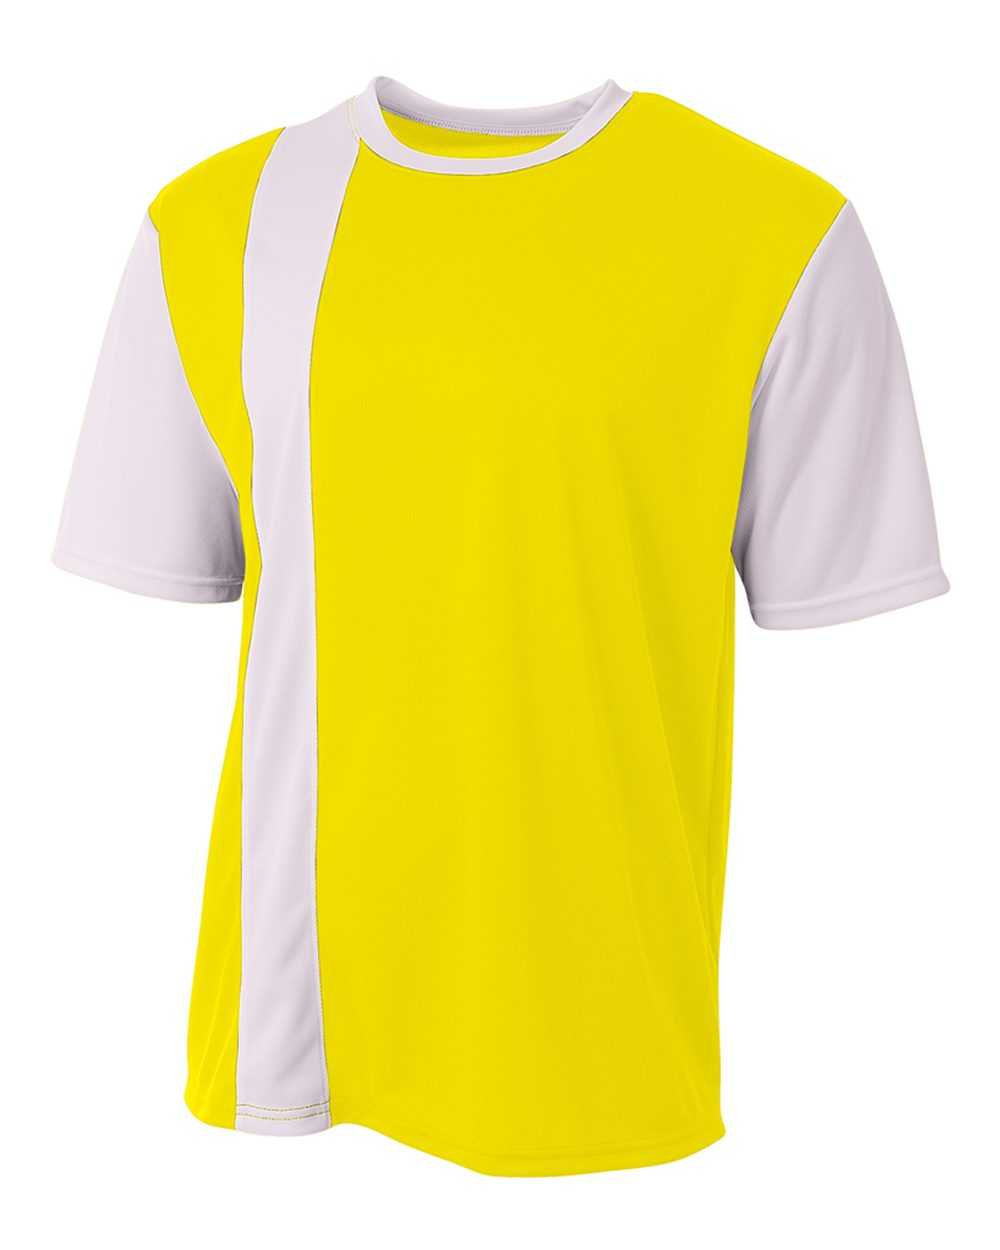 A4 N3016 Legend Soccer Jersey - Safety Yellow White